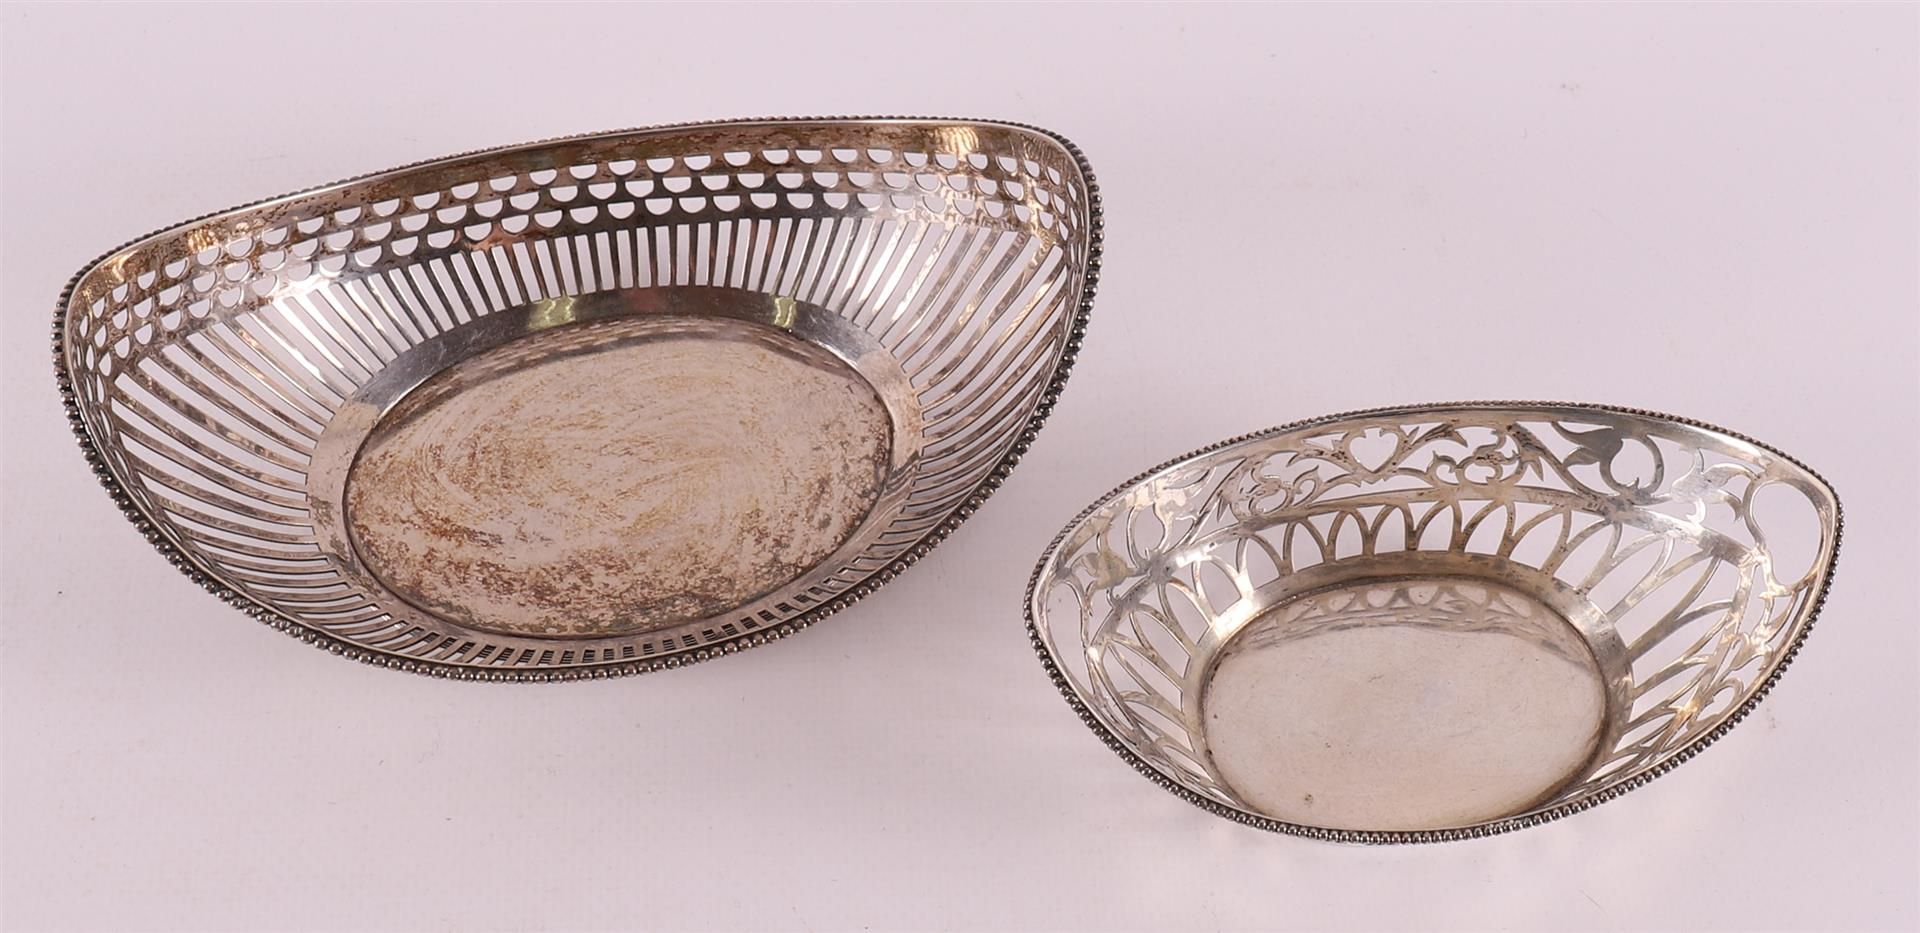 A silver ajourned chocolate basket with pearl rim, 1st half of the 20th century. - Image 2 of 4